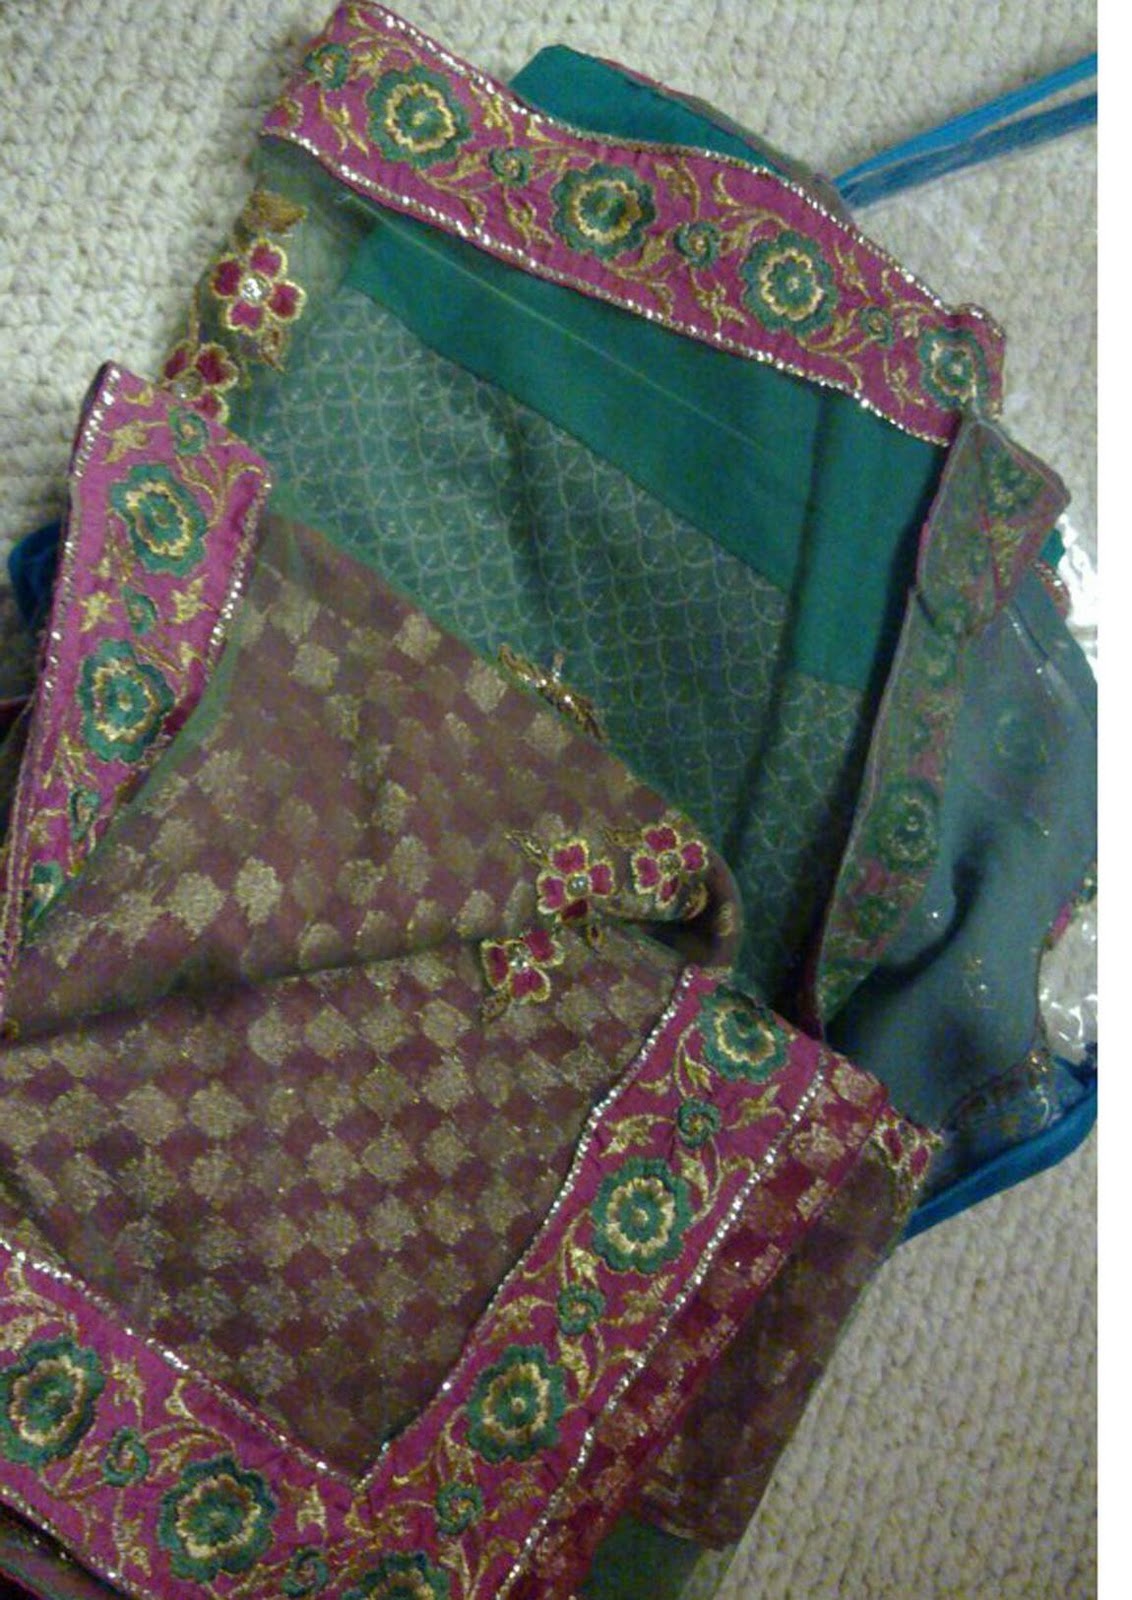 For the sari that will be worn